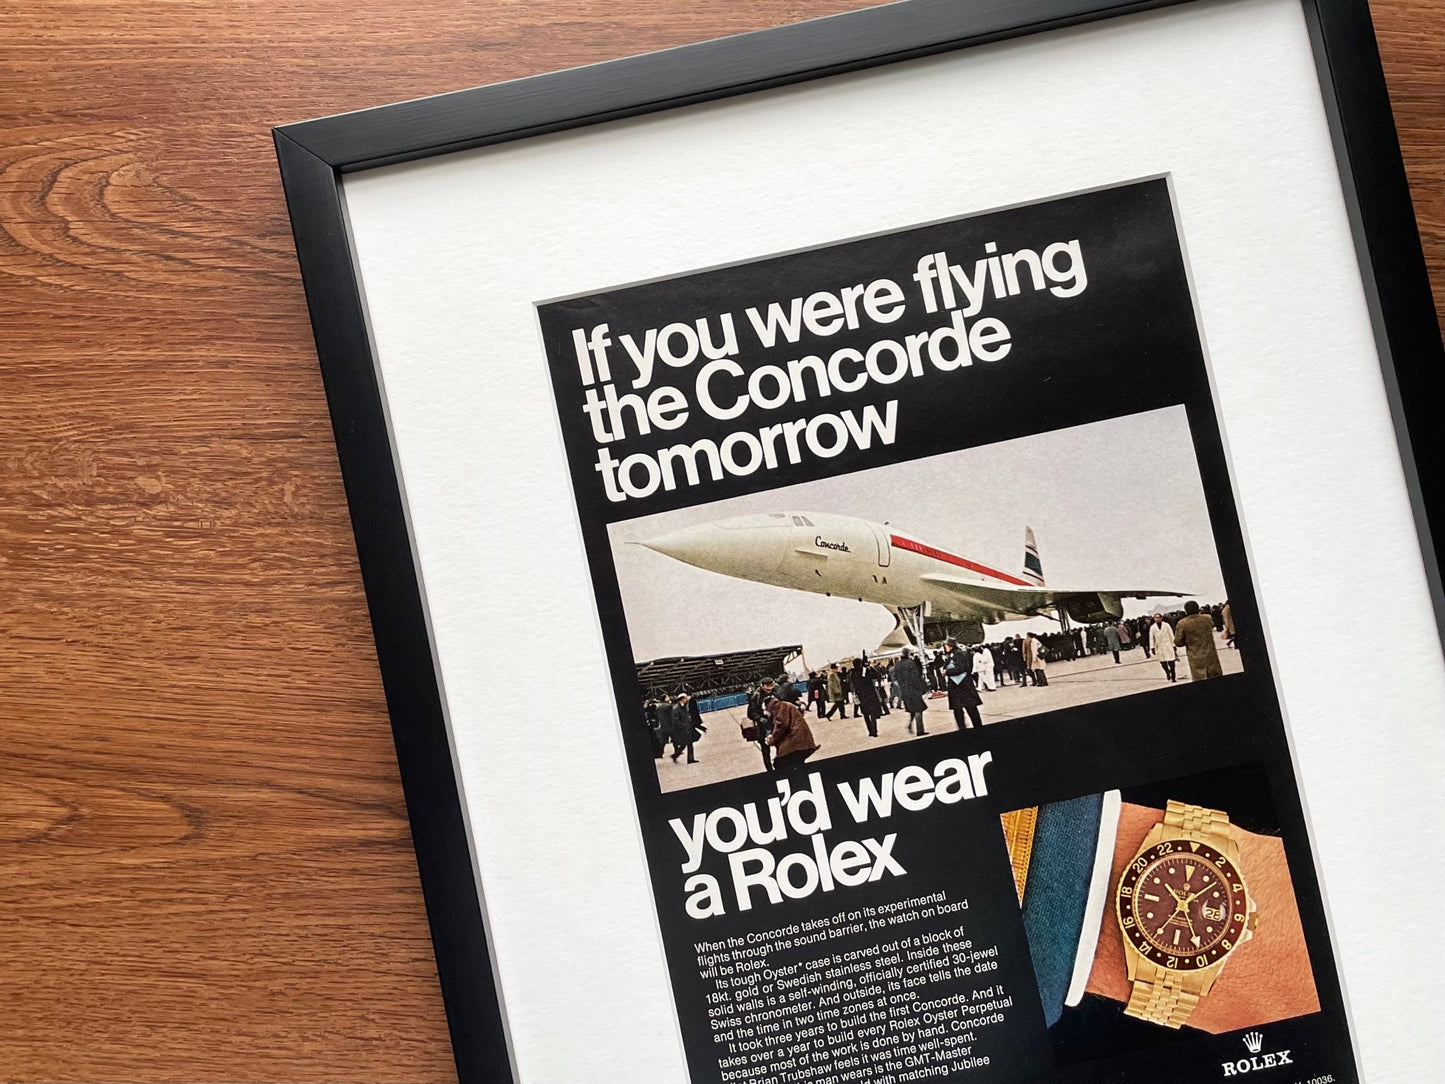 1968 Rolex GMT Master "If you were flying the Concorde" Advertisement in Black Wood Frame